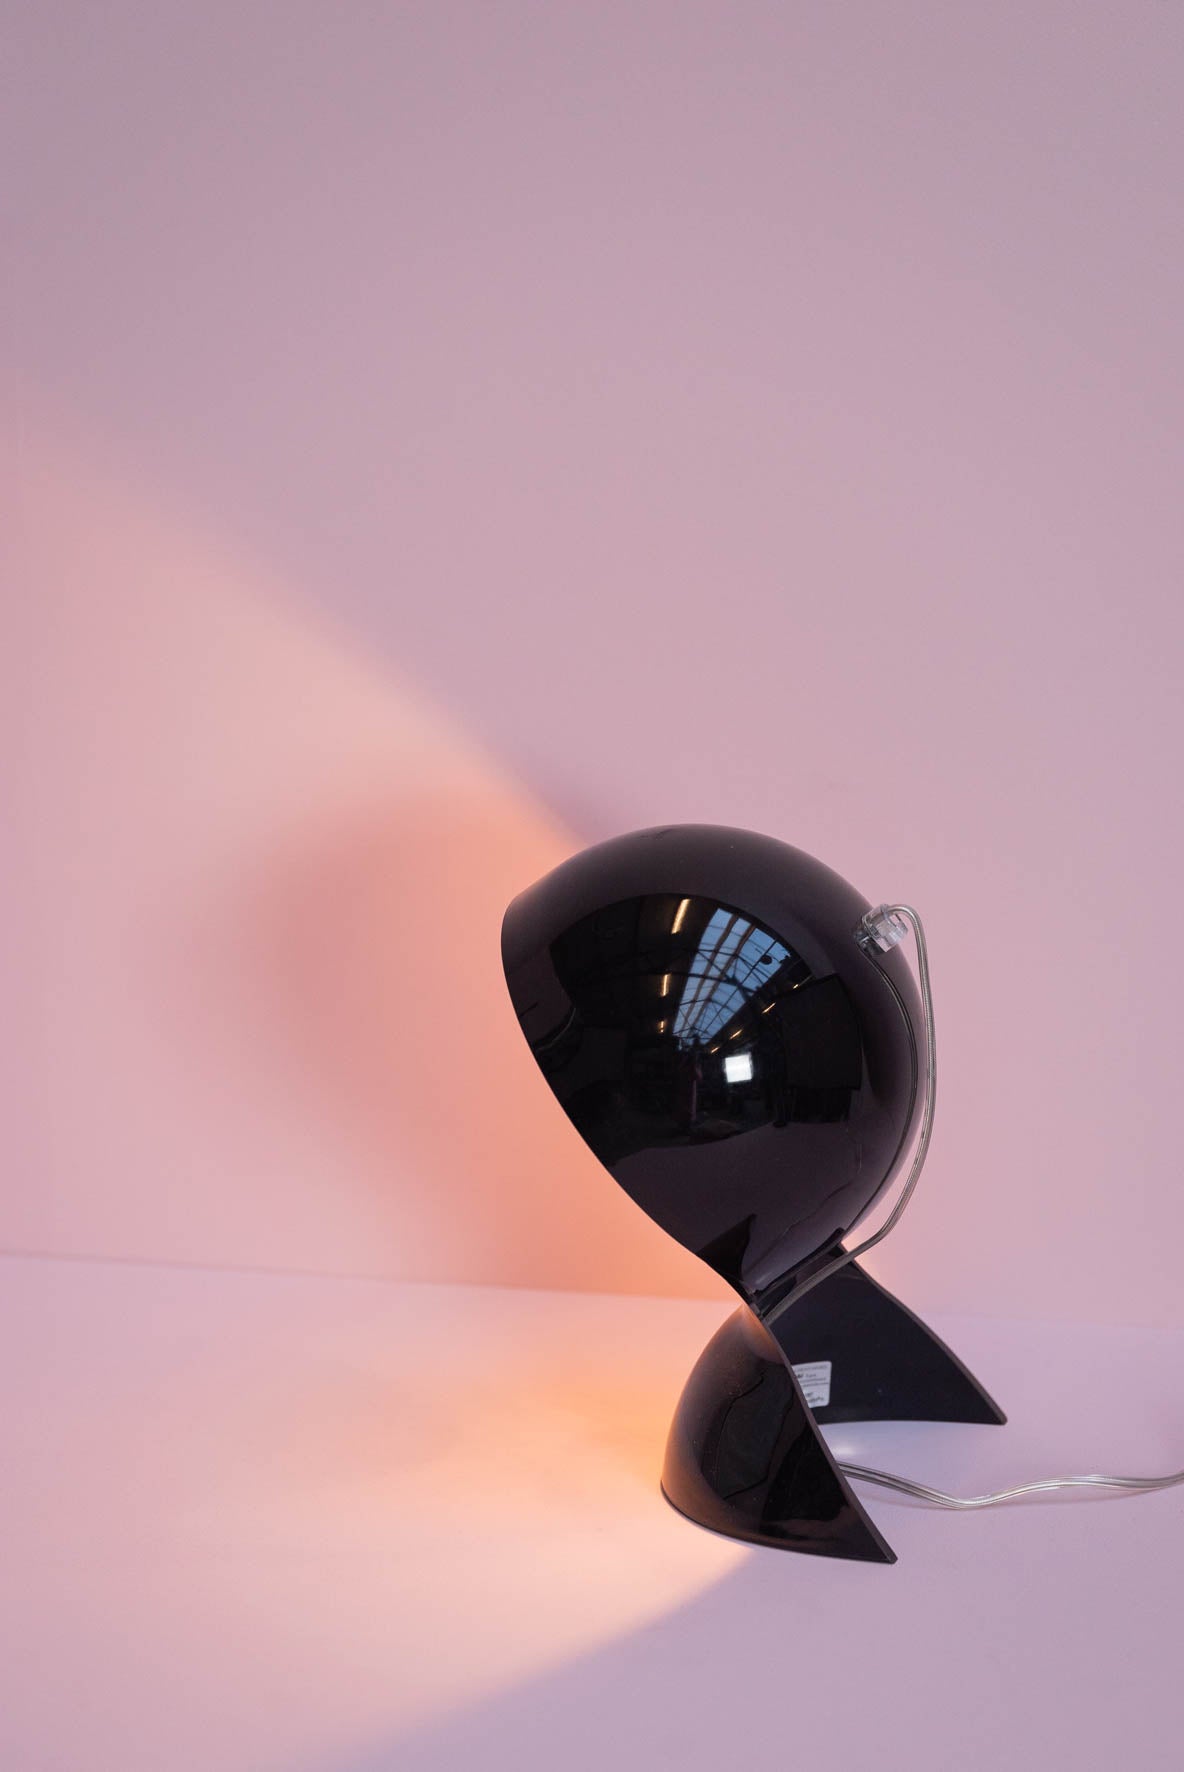 Table lamp Dalu designed by Vico Magistretti produced by Artemide